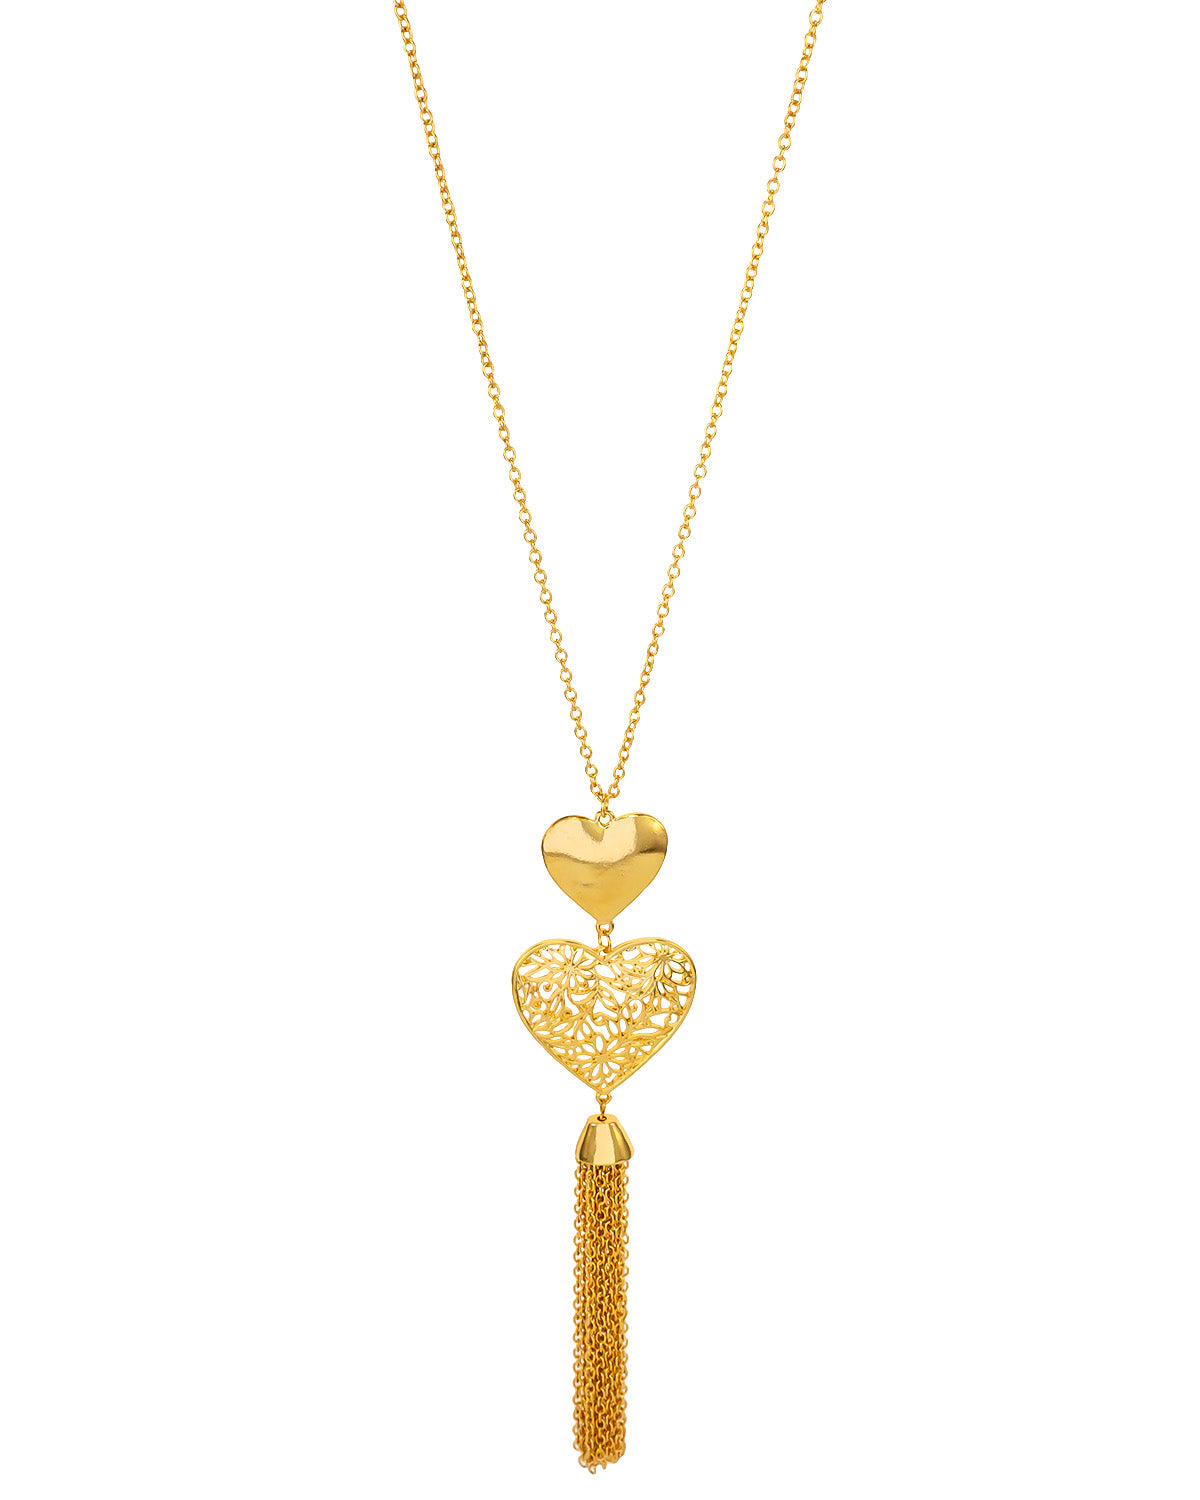 Dauplaise Jewelry - Valentines Double Heart Tassel Necklace